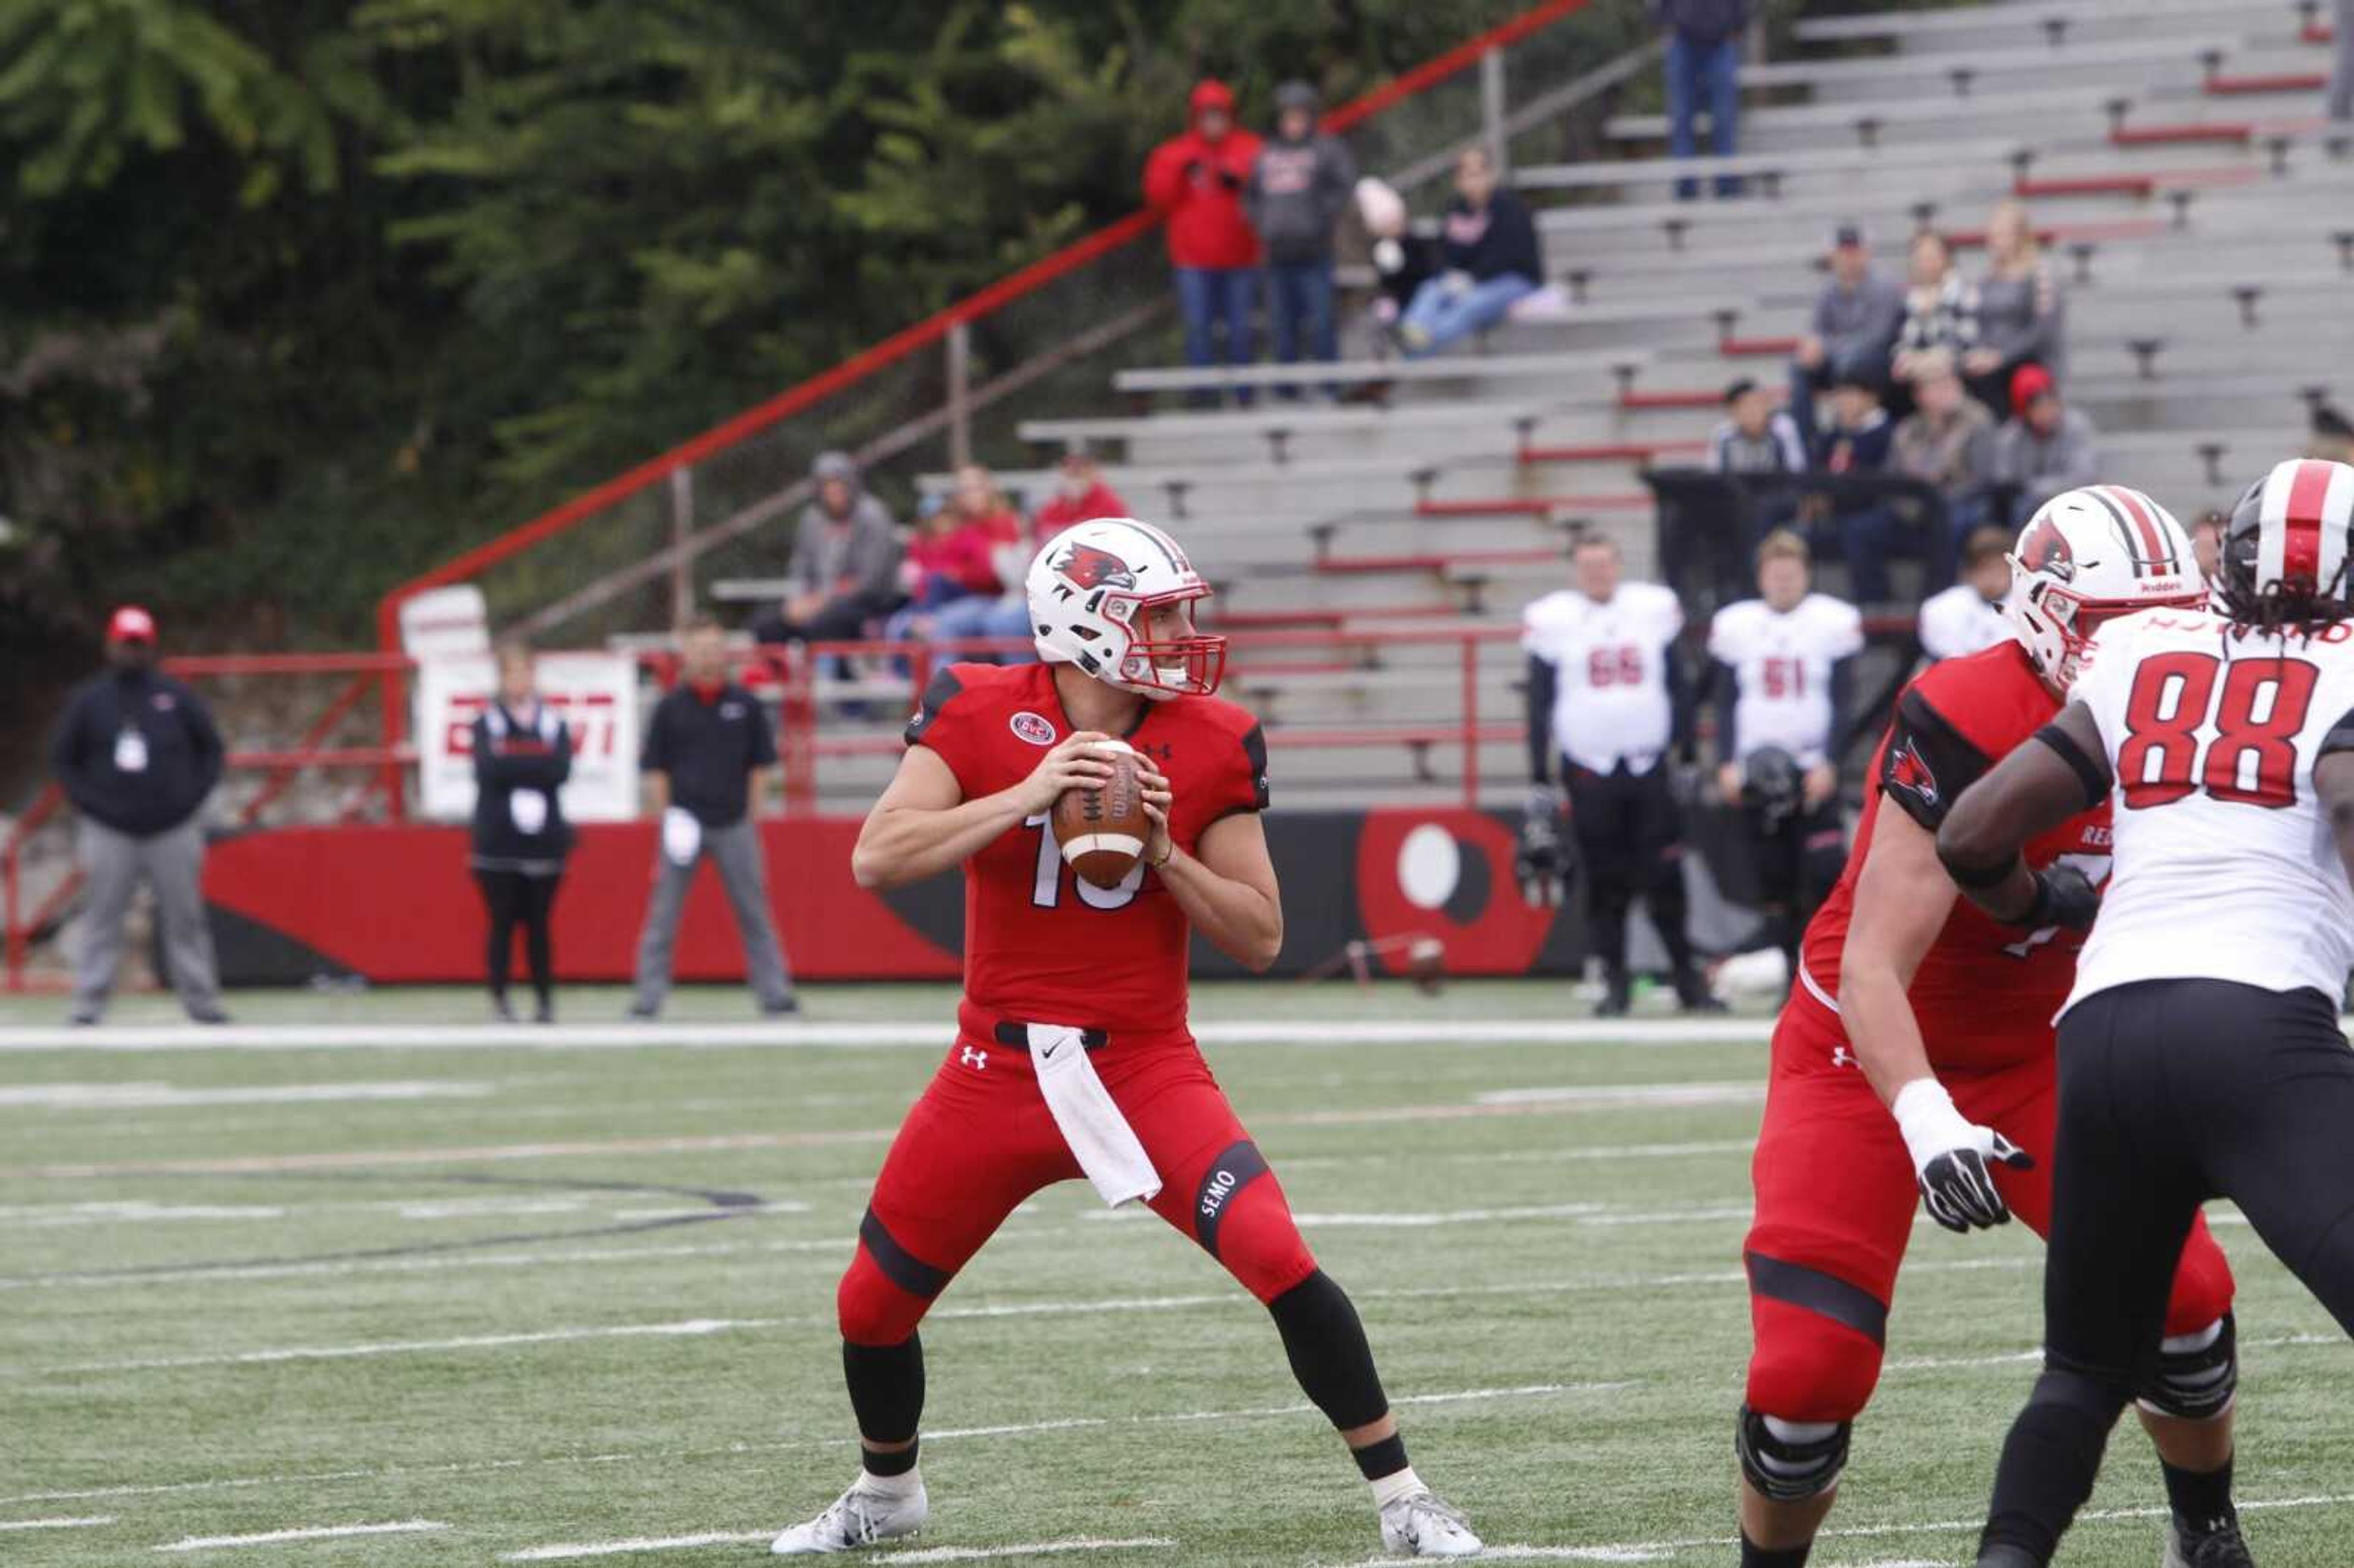 Junior quarterback Daniel Santacaterina drops back to make a play downfield against Austin Peay on Oct. 13.